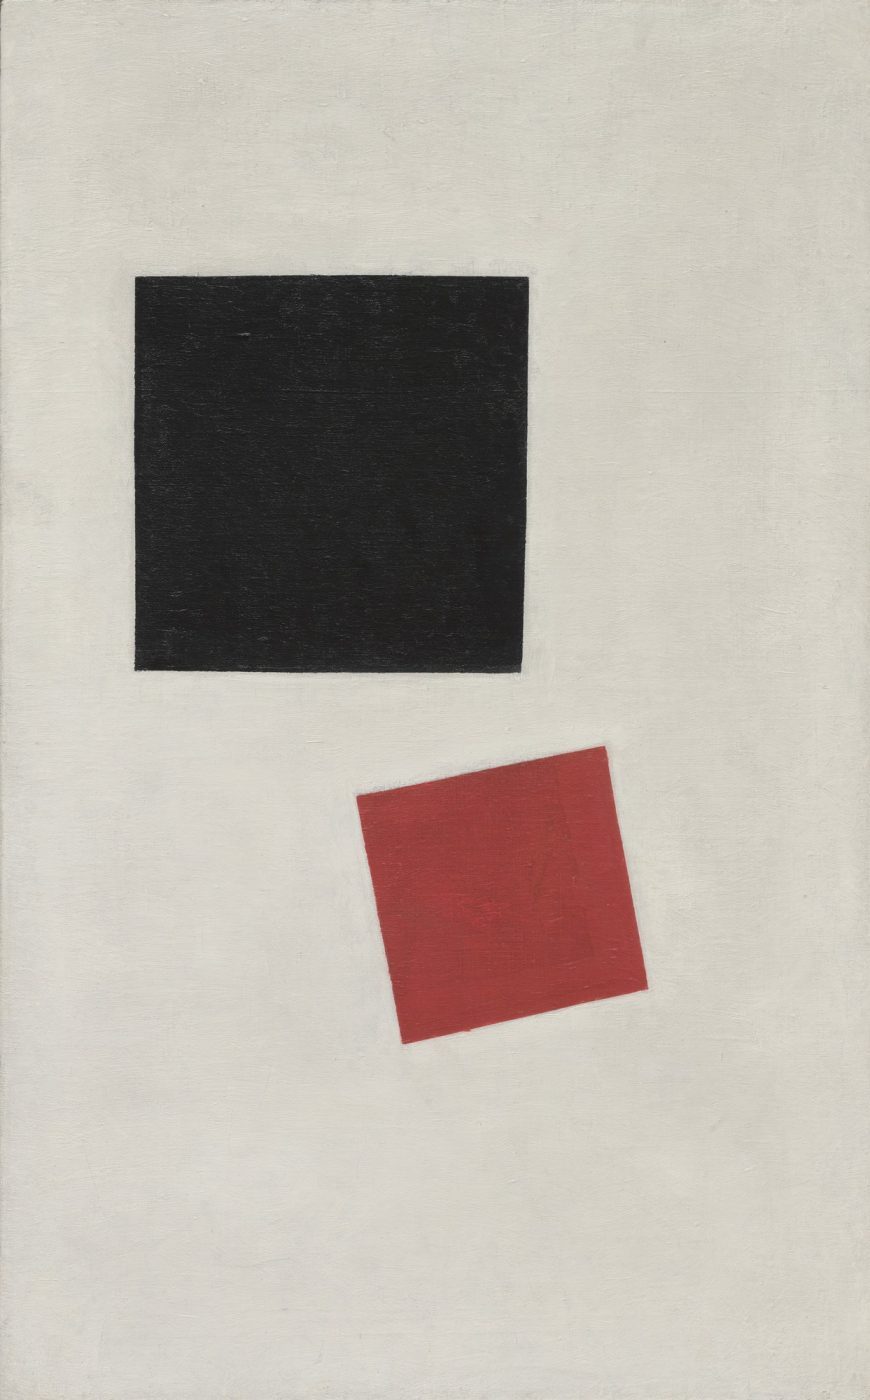 Kasimir Malevich, Painterly Realism of a Boy with a Knapsack. Color Masses in the Fourth Dimension, 1915, oil on canvas, 71.1 x 44.5 cm (MoMA).